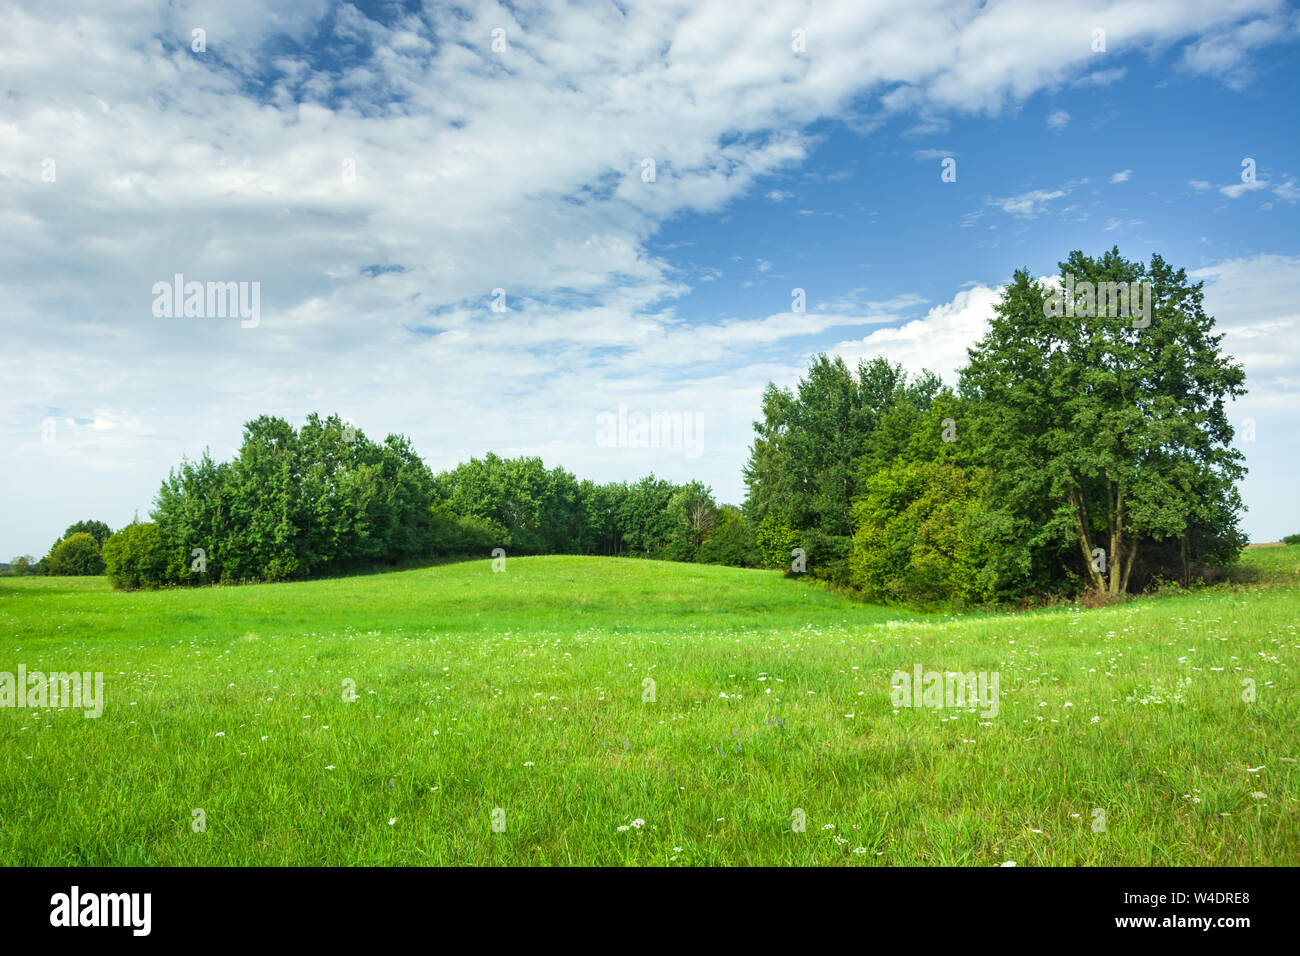 Green hilly meadow and trees, white clouds and blue sky. Staszyce, Poland Stock Photo